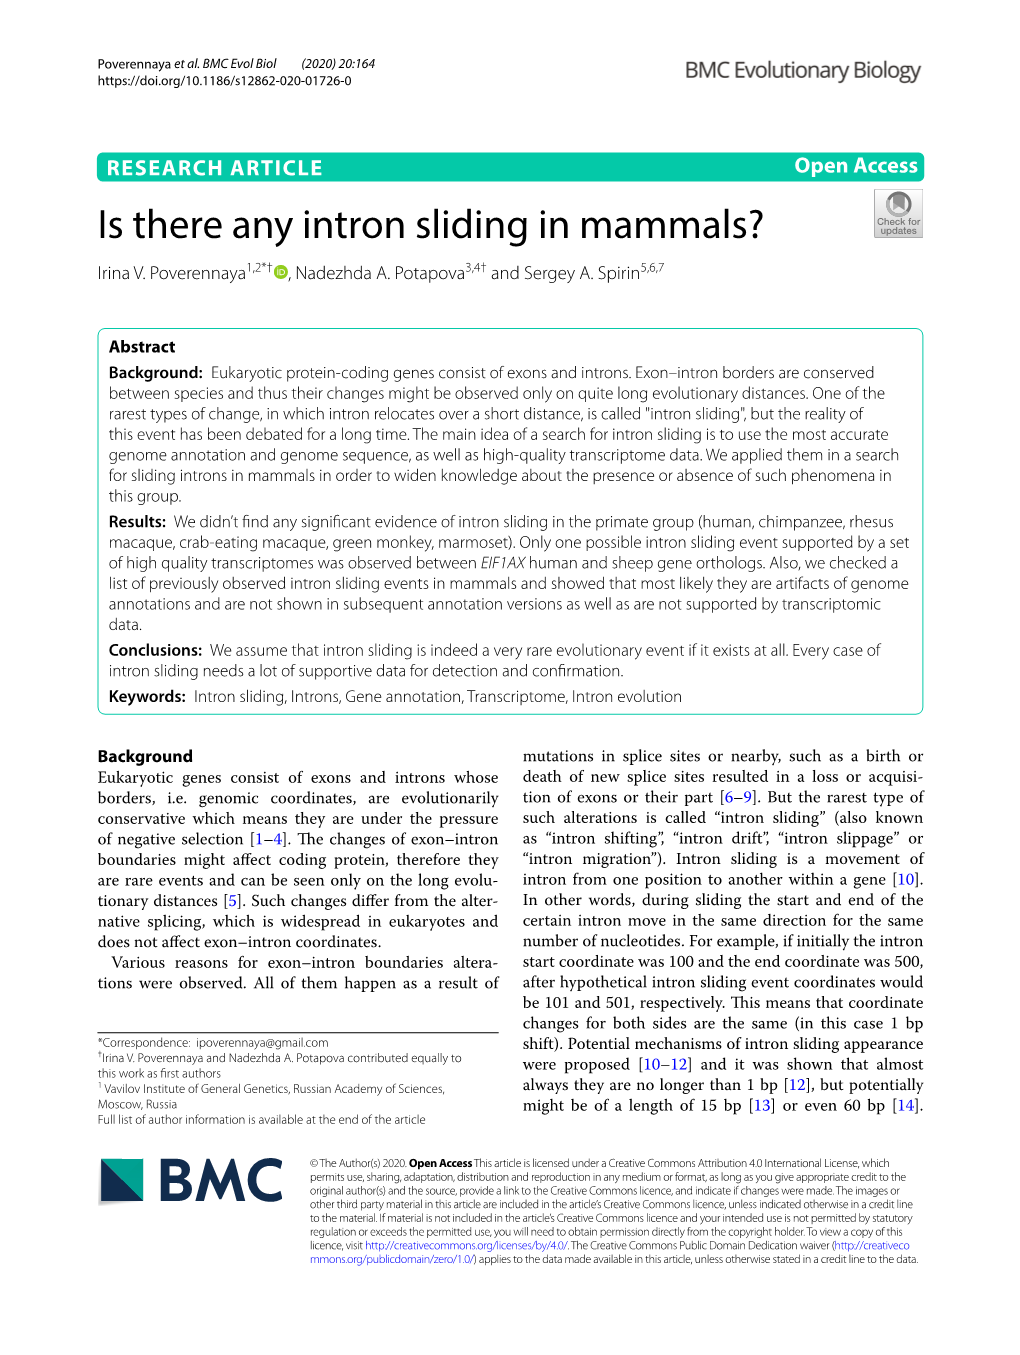 Is There Any Intron Sliding in Mammals? Irina V